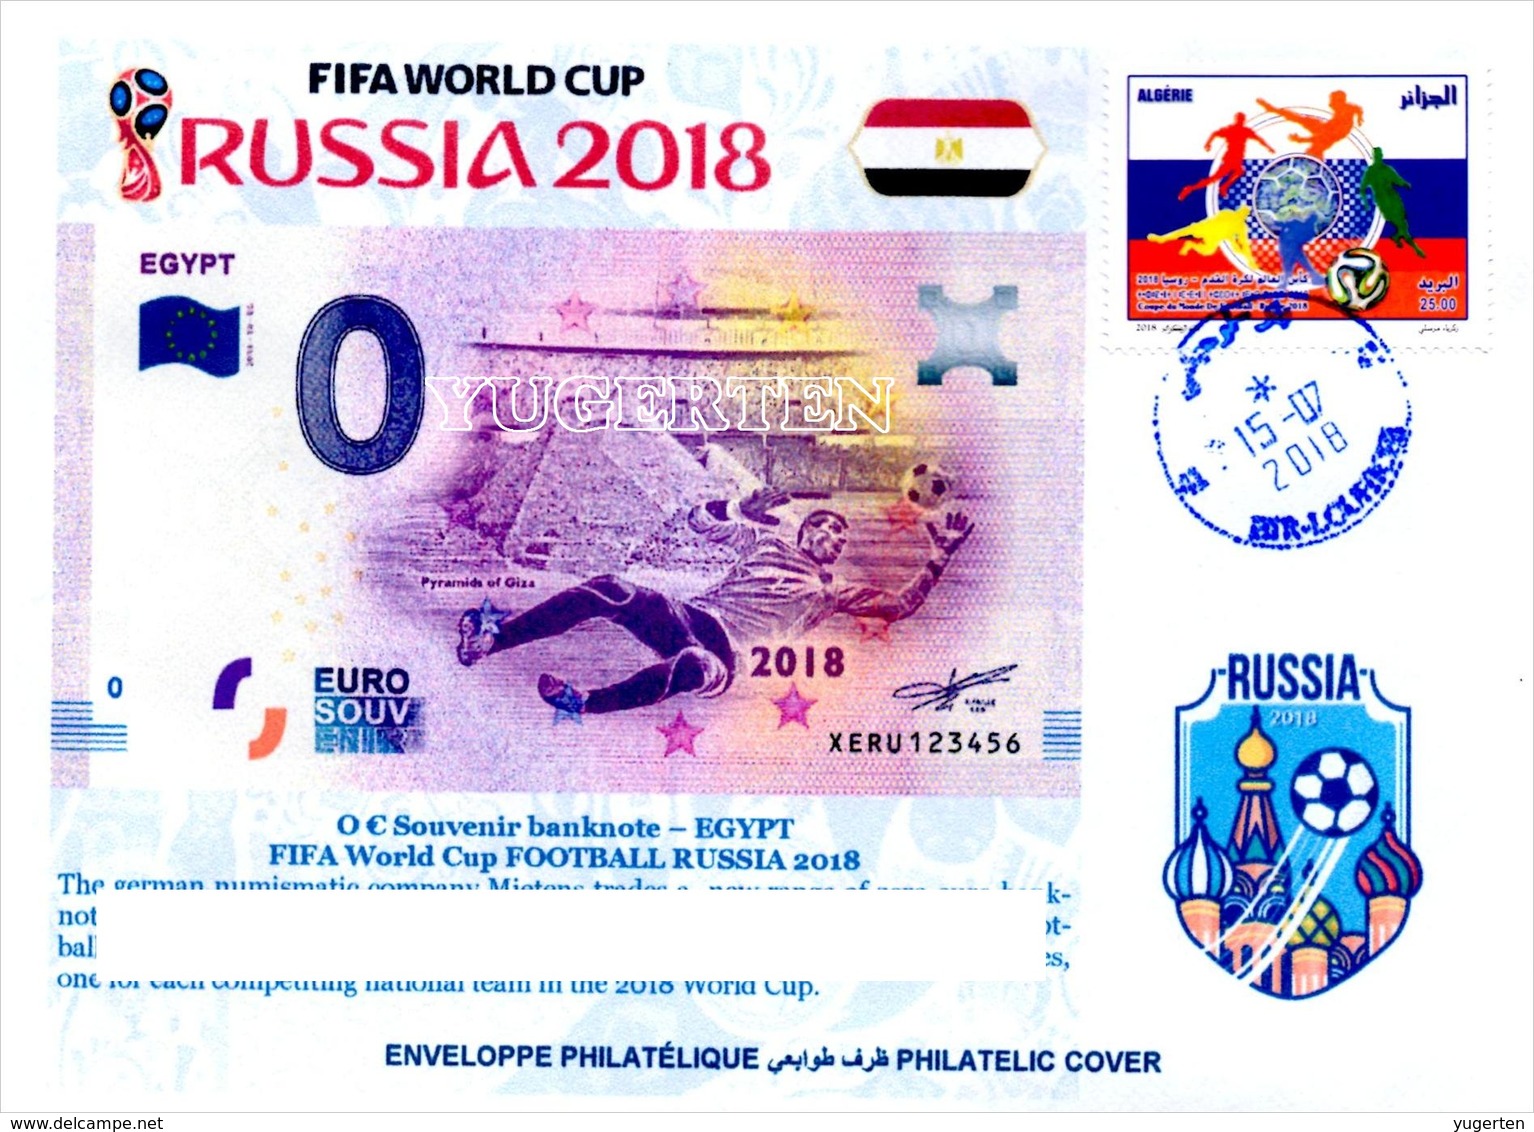 ARGHELIA - Philatelic Cover Egypt Egypte Pyramids FIFA Football World Cup Russia 2018 Banknotes Currencies Money - 2018 – Rusia